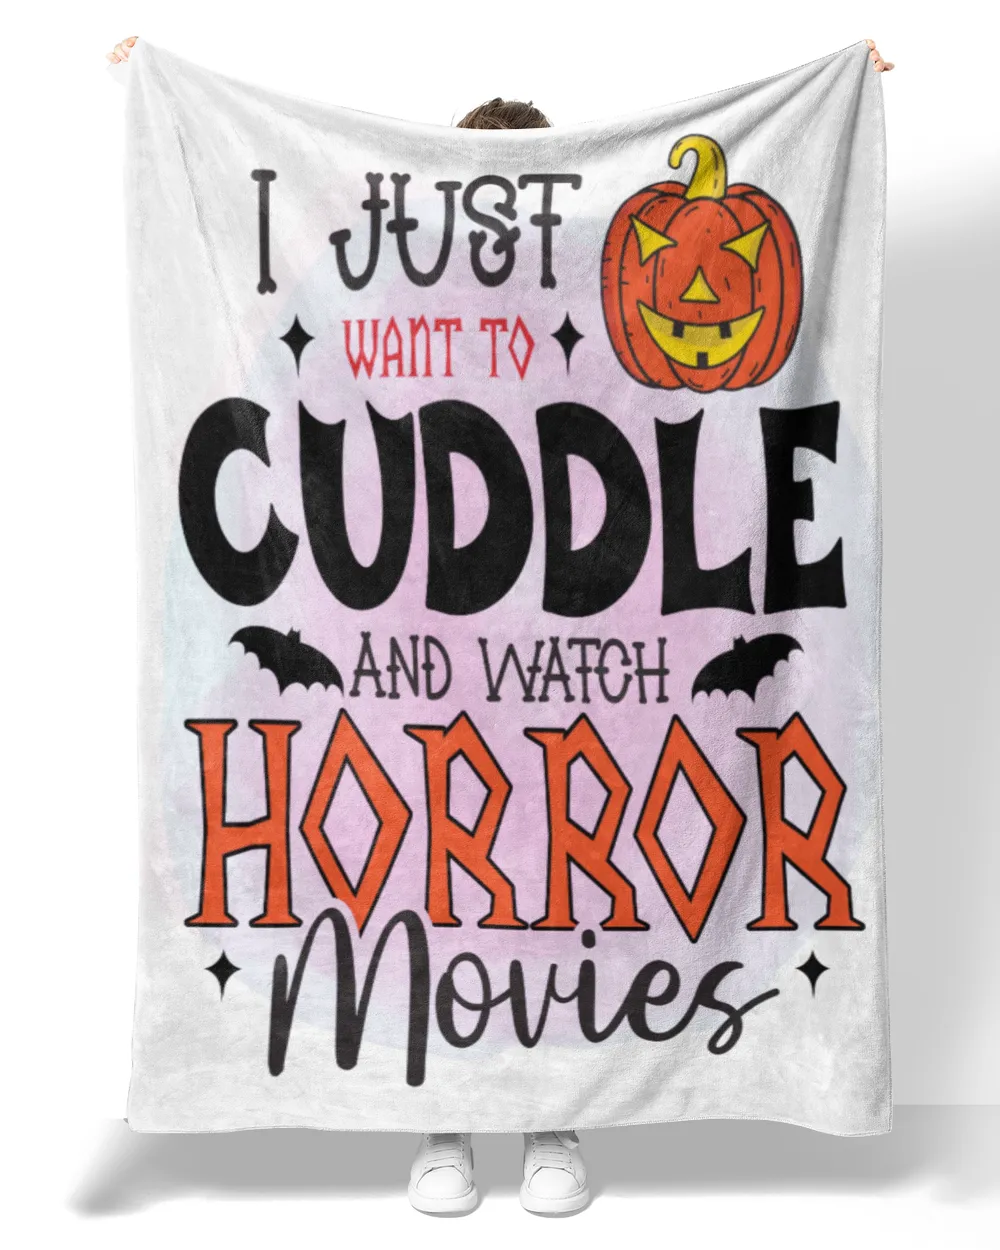 I just want to cuddle and watch horror movies